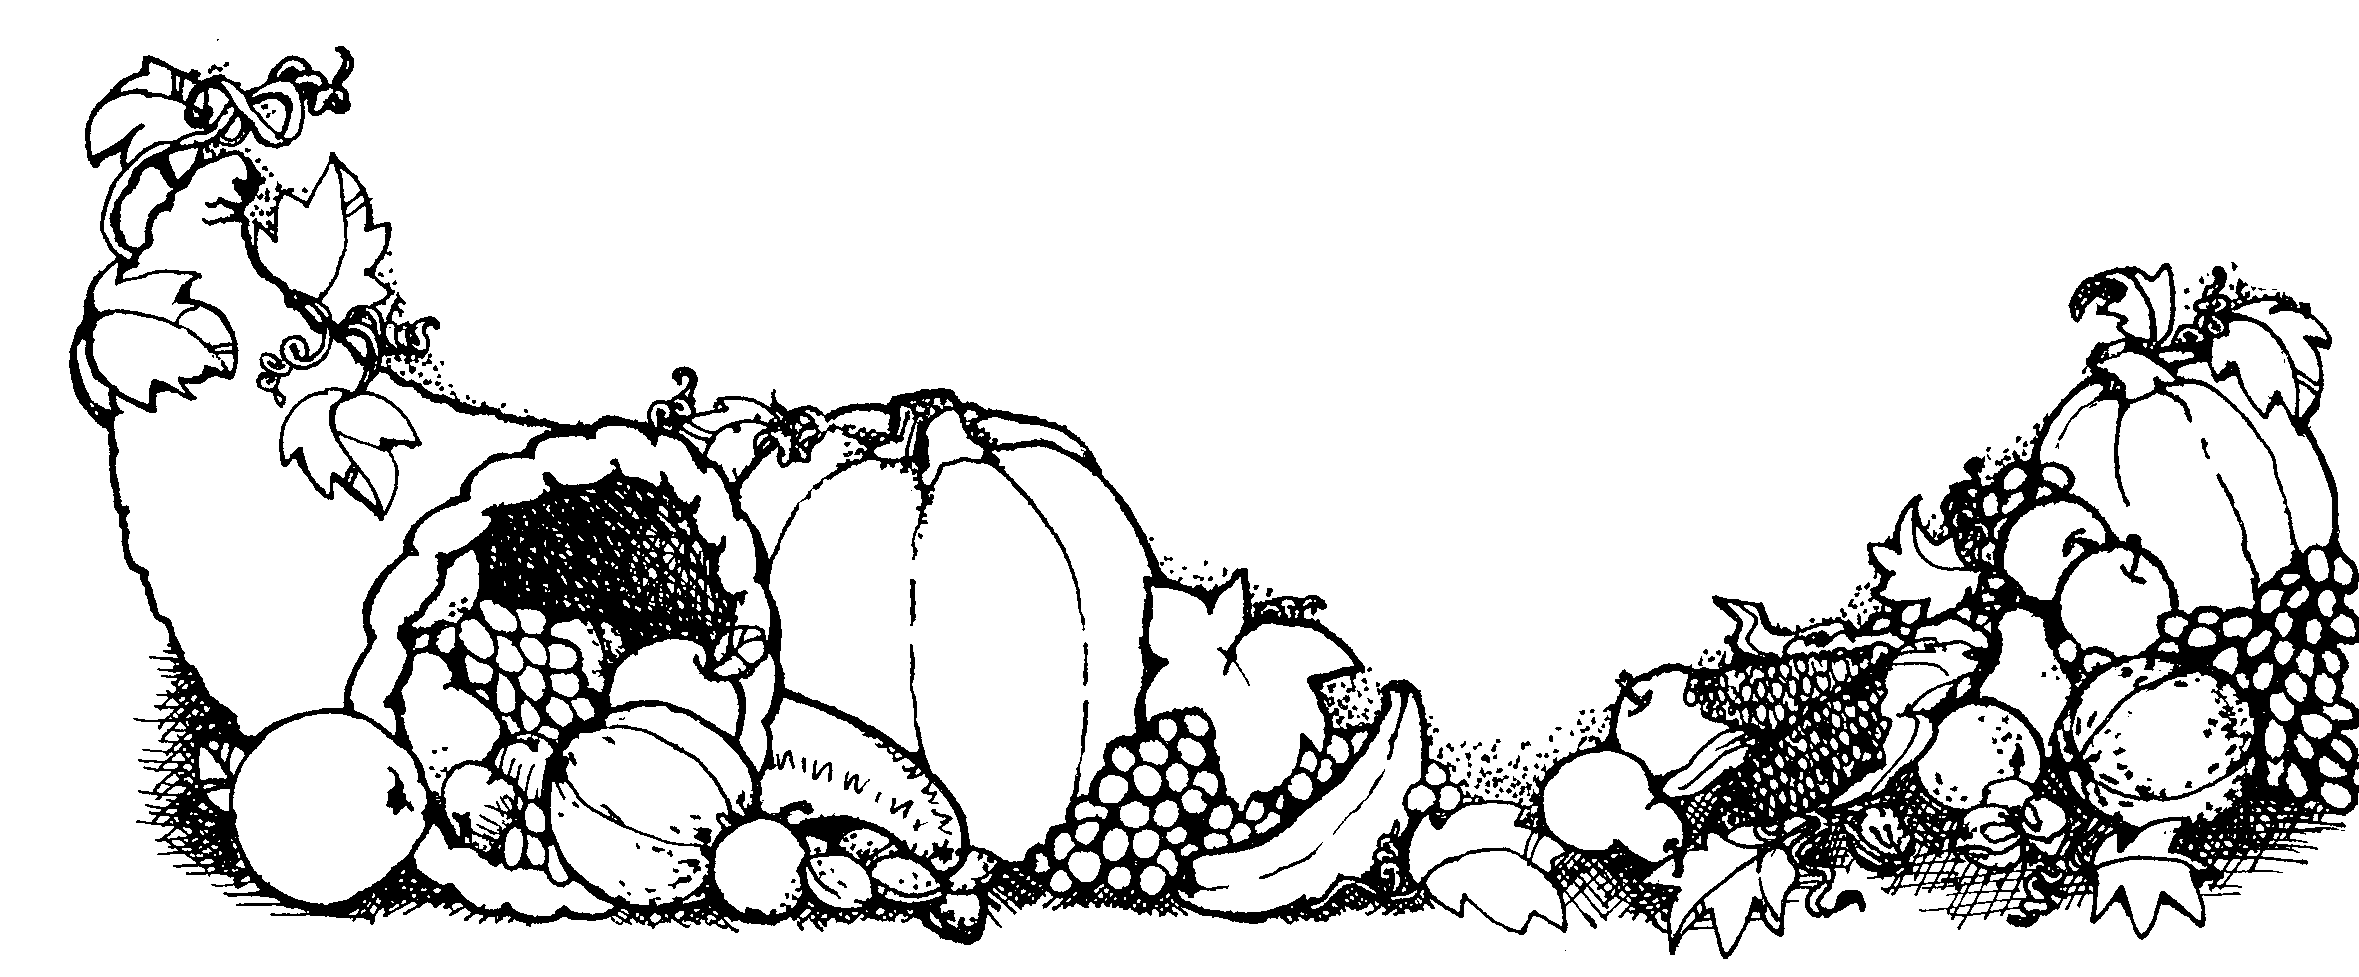 free black and white clip art for thanksgiving - photo #26